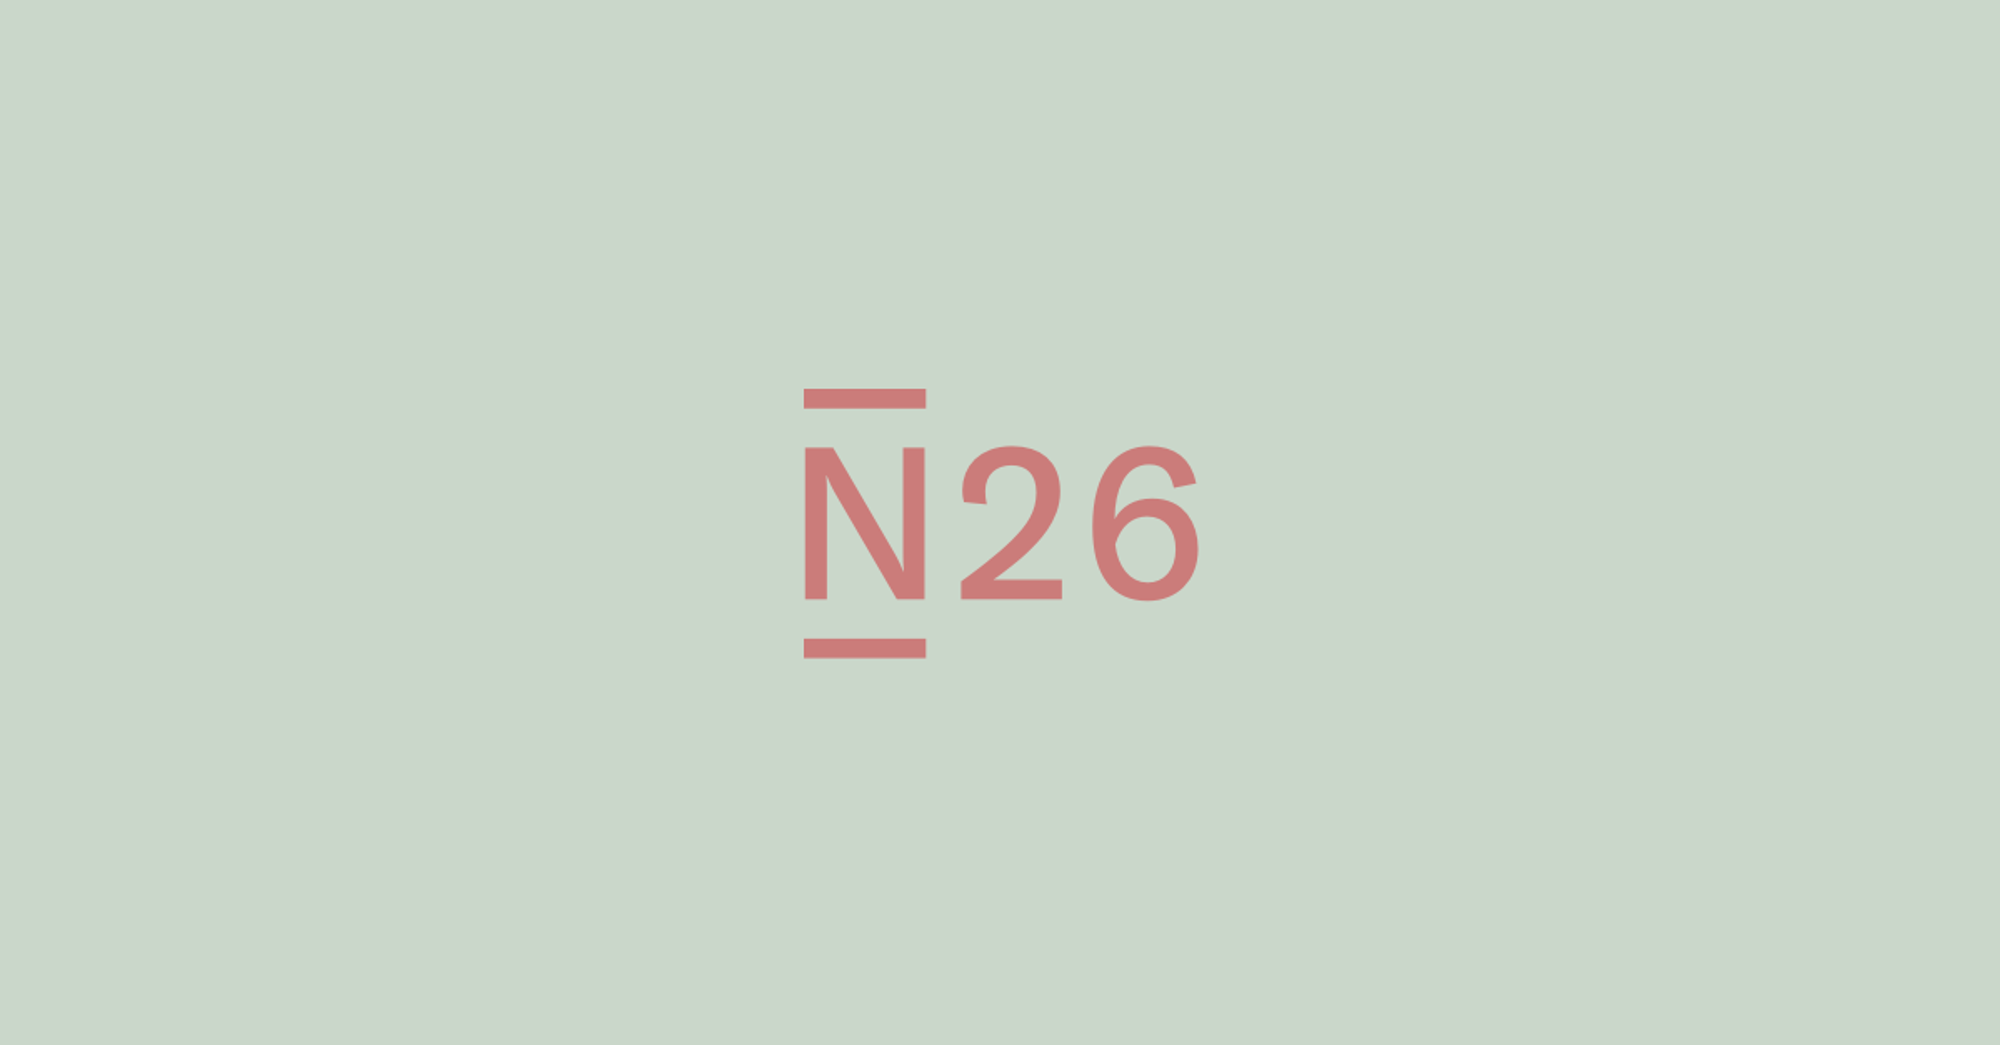 NIAN invited you to join N26